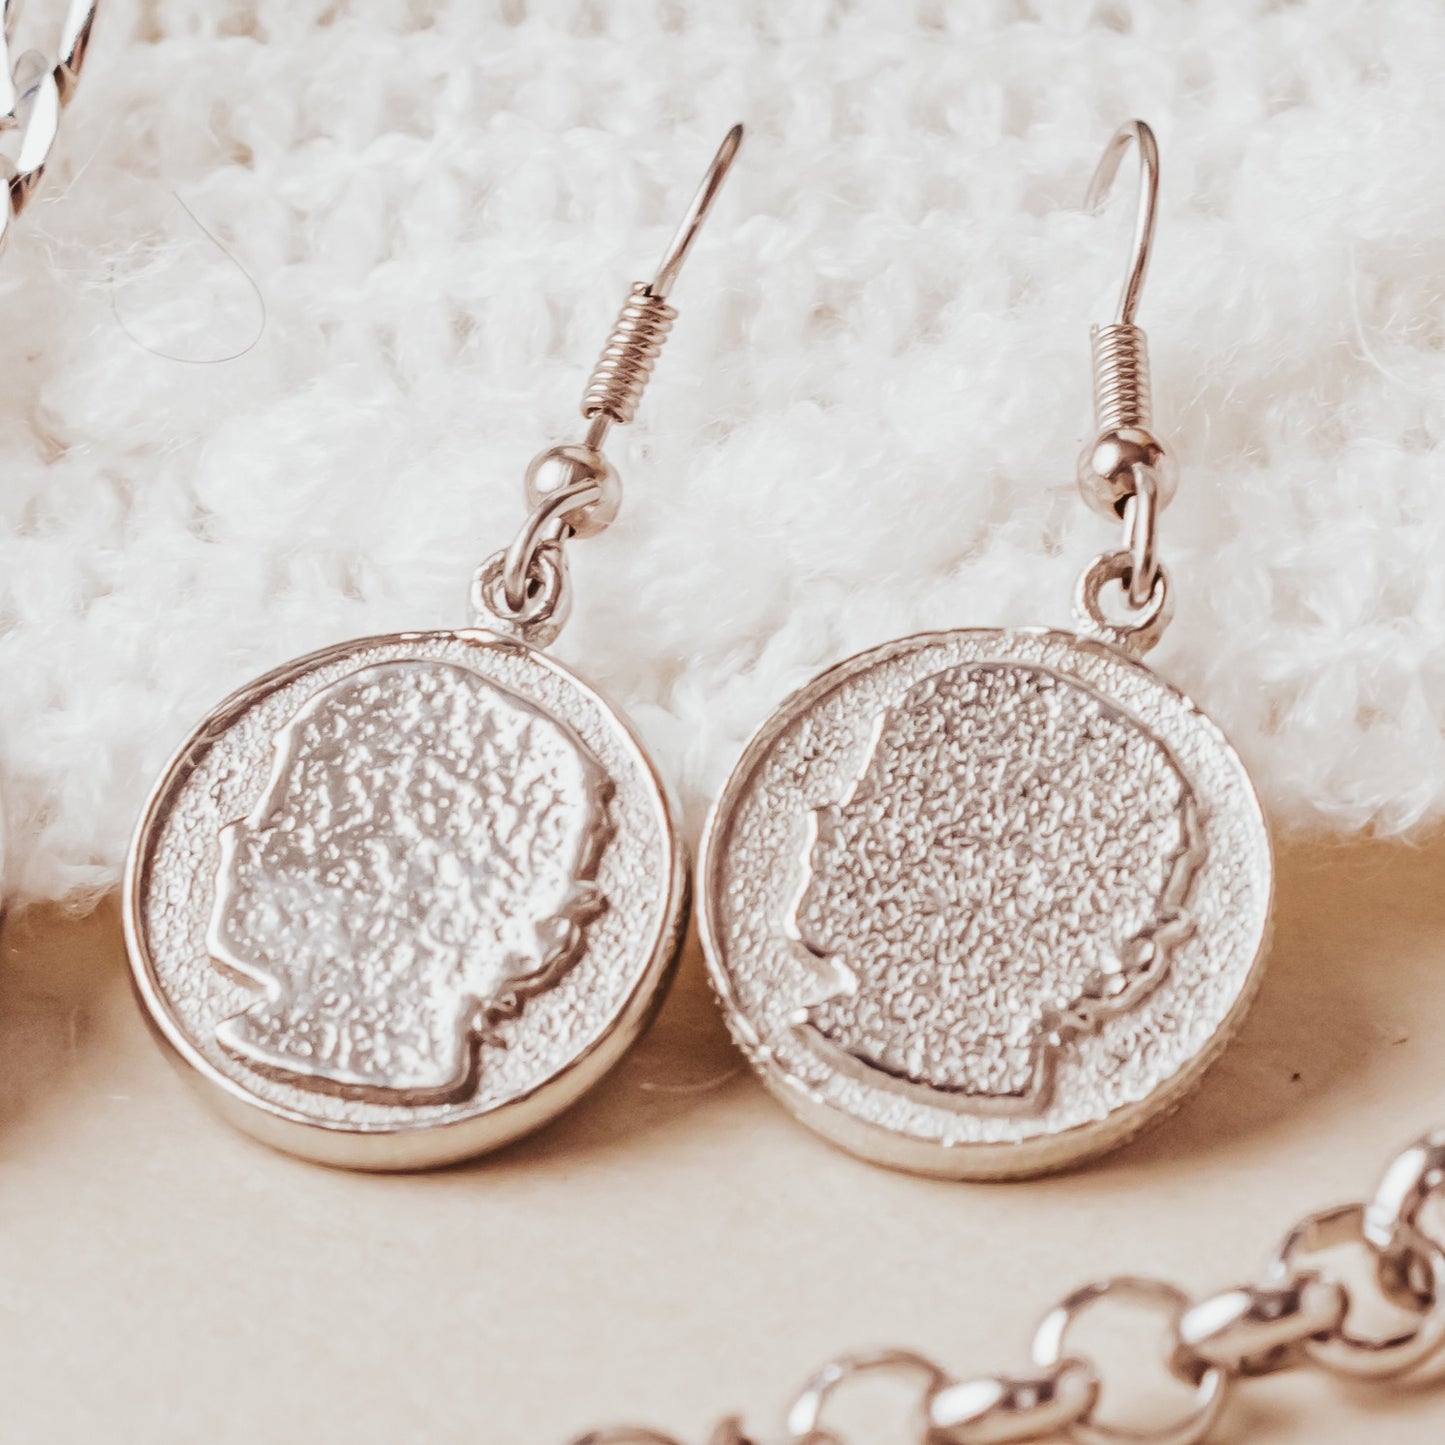 Baby Profile Gifts - Baby Silhouette Jewelry